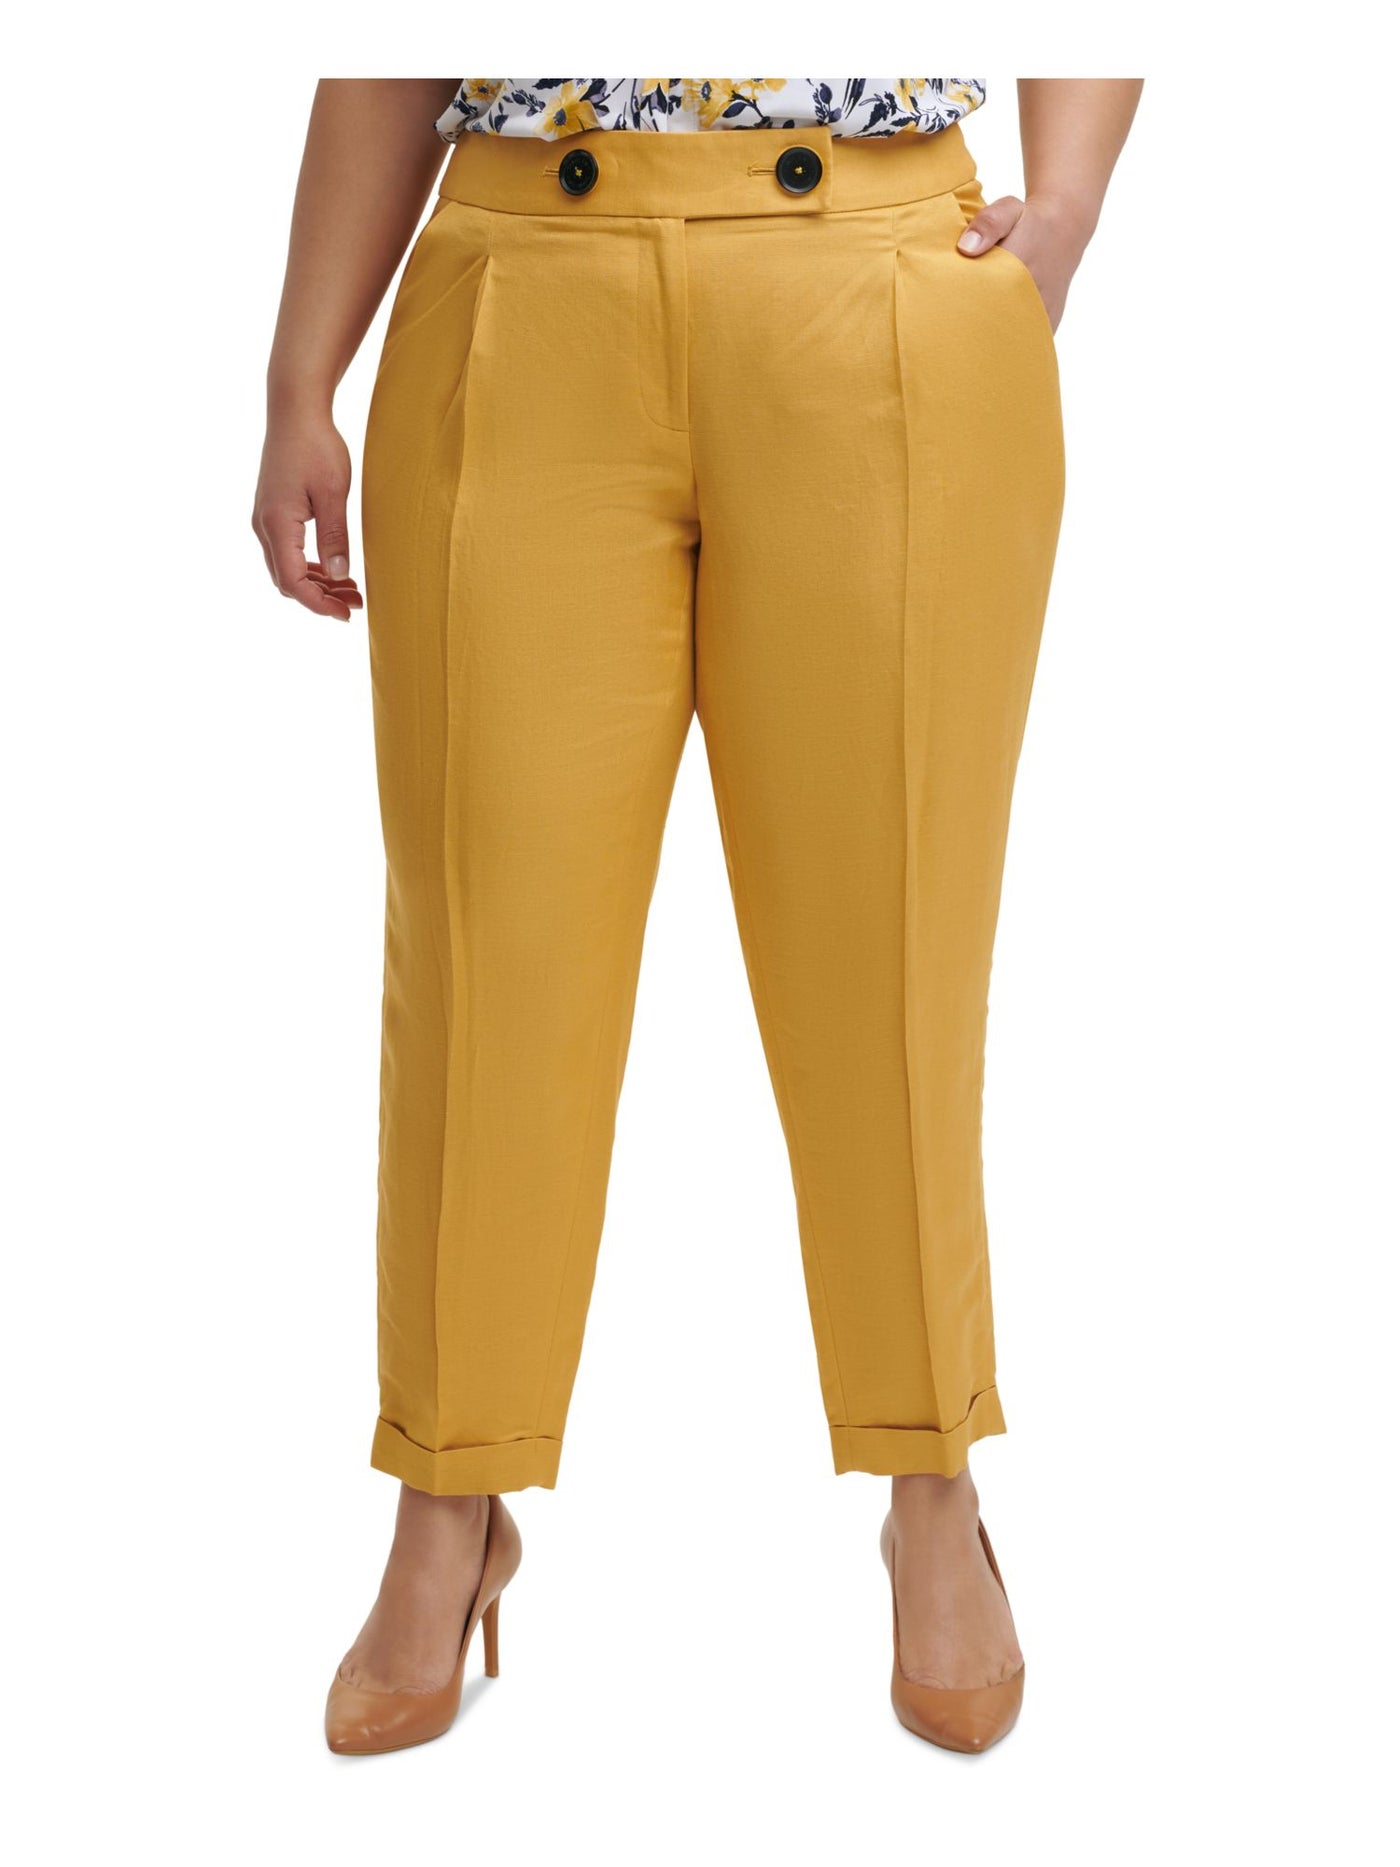 CALVIN KLEIN Womens Yellow Zippered Pocketed Creased Pleated Wear To Work Cuffed Pants Plus 20W